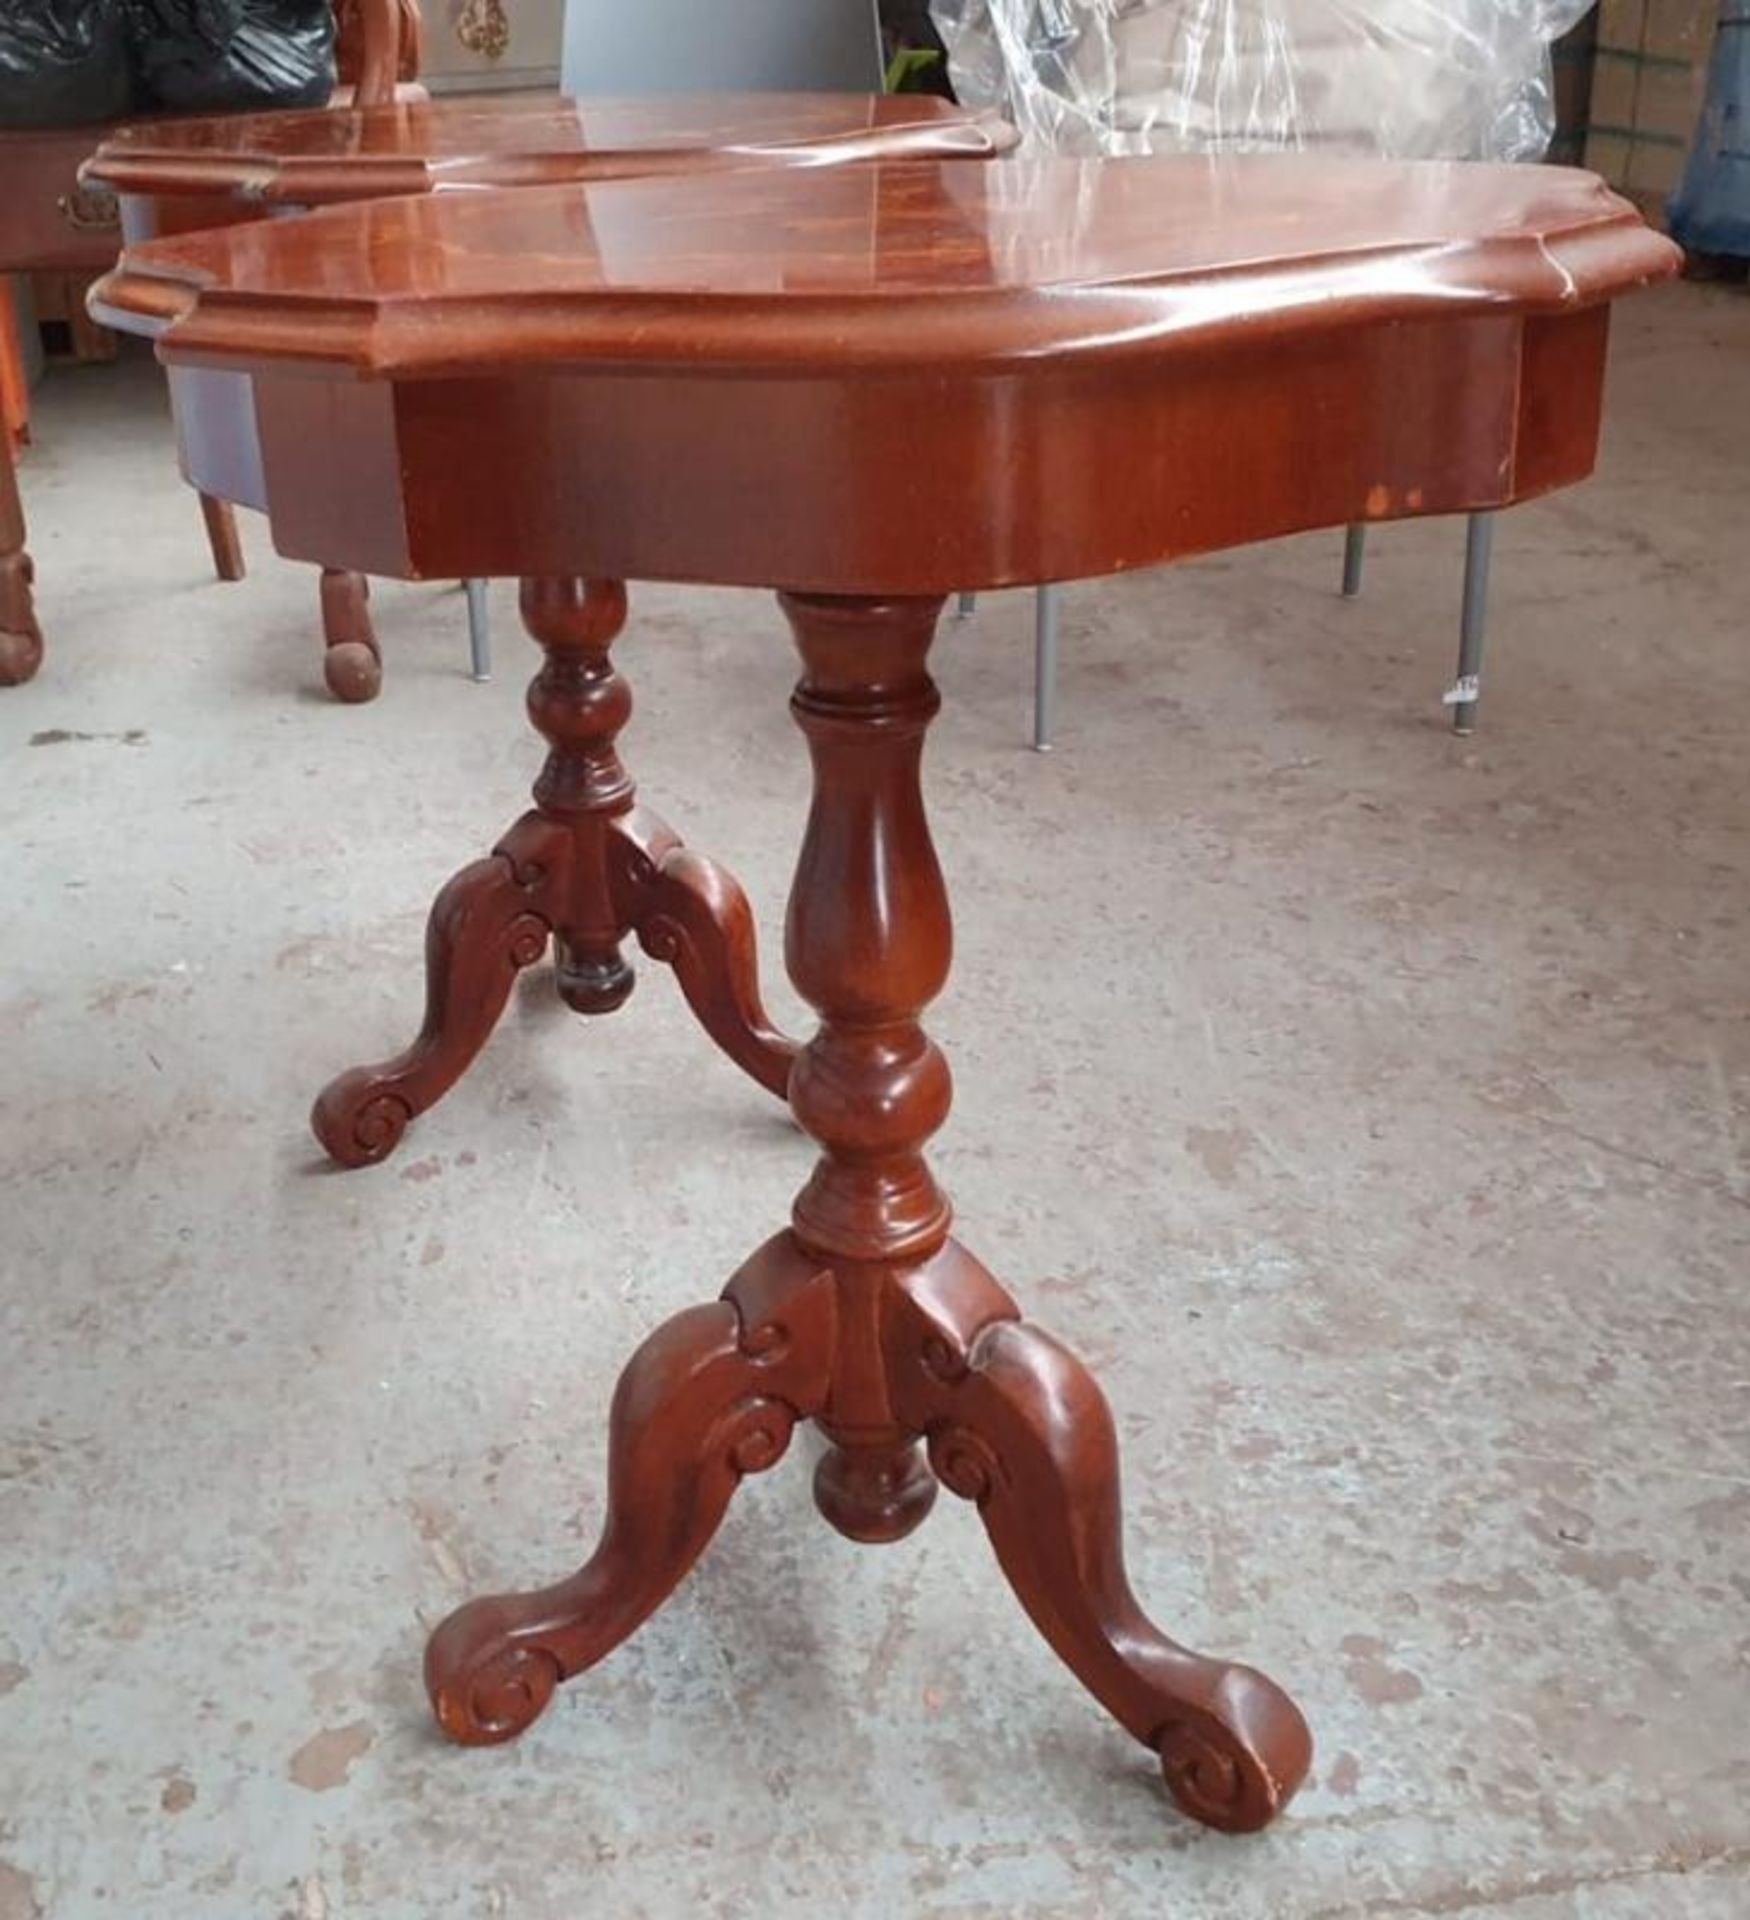 A Pair Of Period-Style Side / Lamp Tables With Ornate Legs - Unused Boxed Stock - £1 Start, No Reser - Image 8 of 8